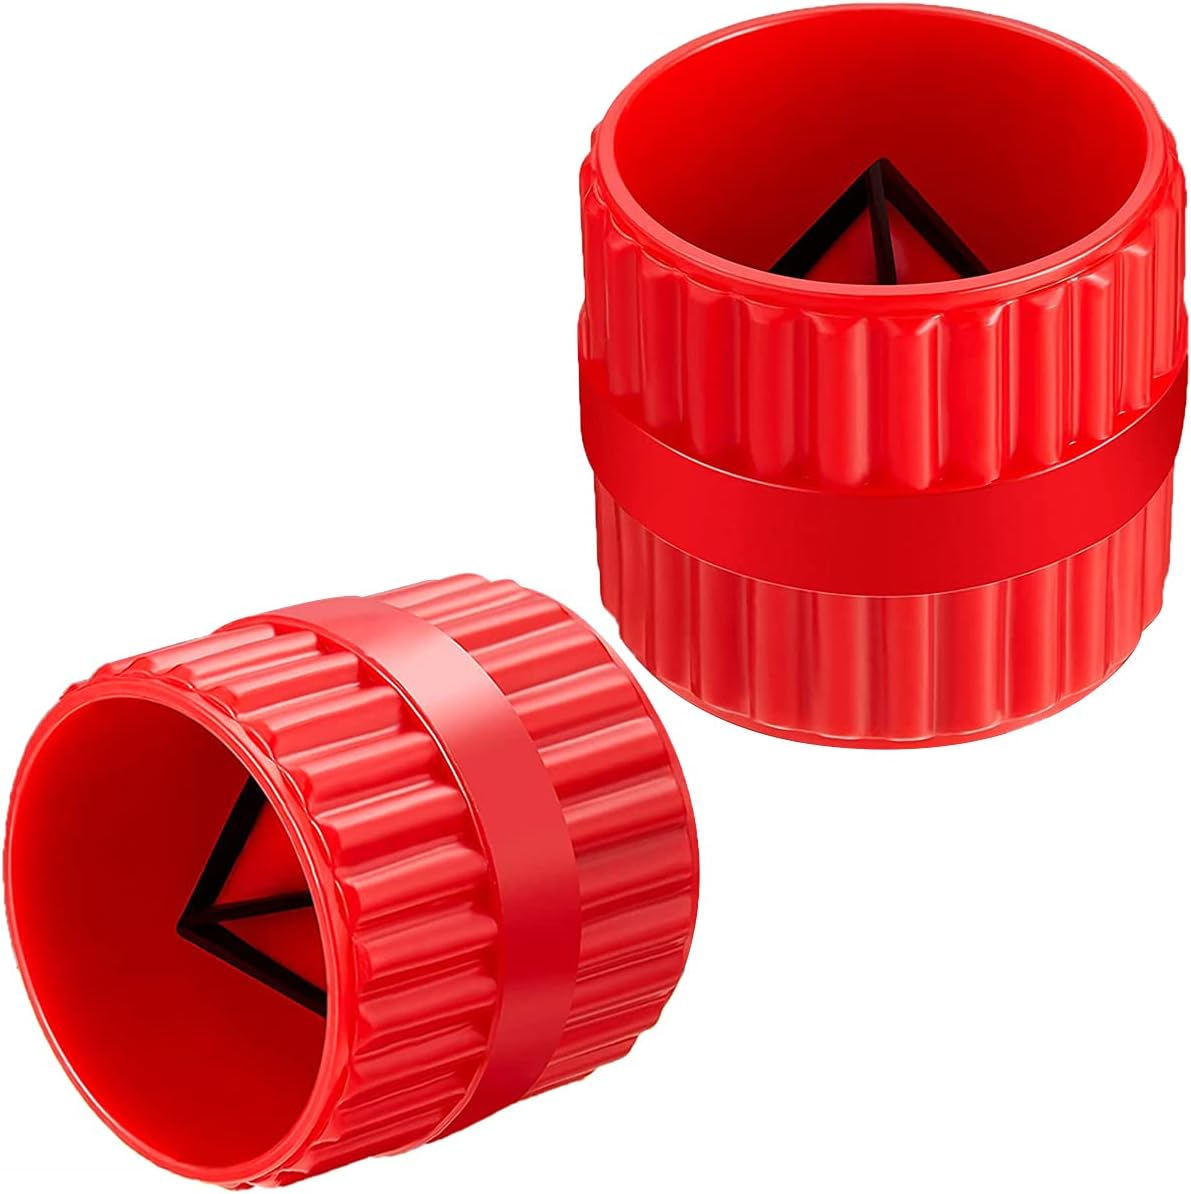 yinrong 2 Pieces Red Inner-Outer Reamer Pipe and Tube Deburring Reamer Tubing Chamfer Tool for PVC/PPR/Copper/Brass/Aluminum Tubes(3/16